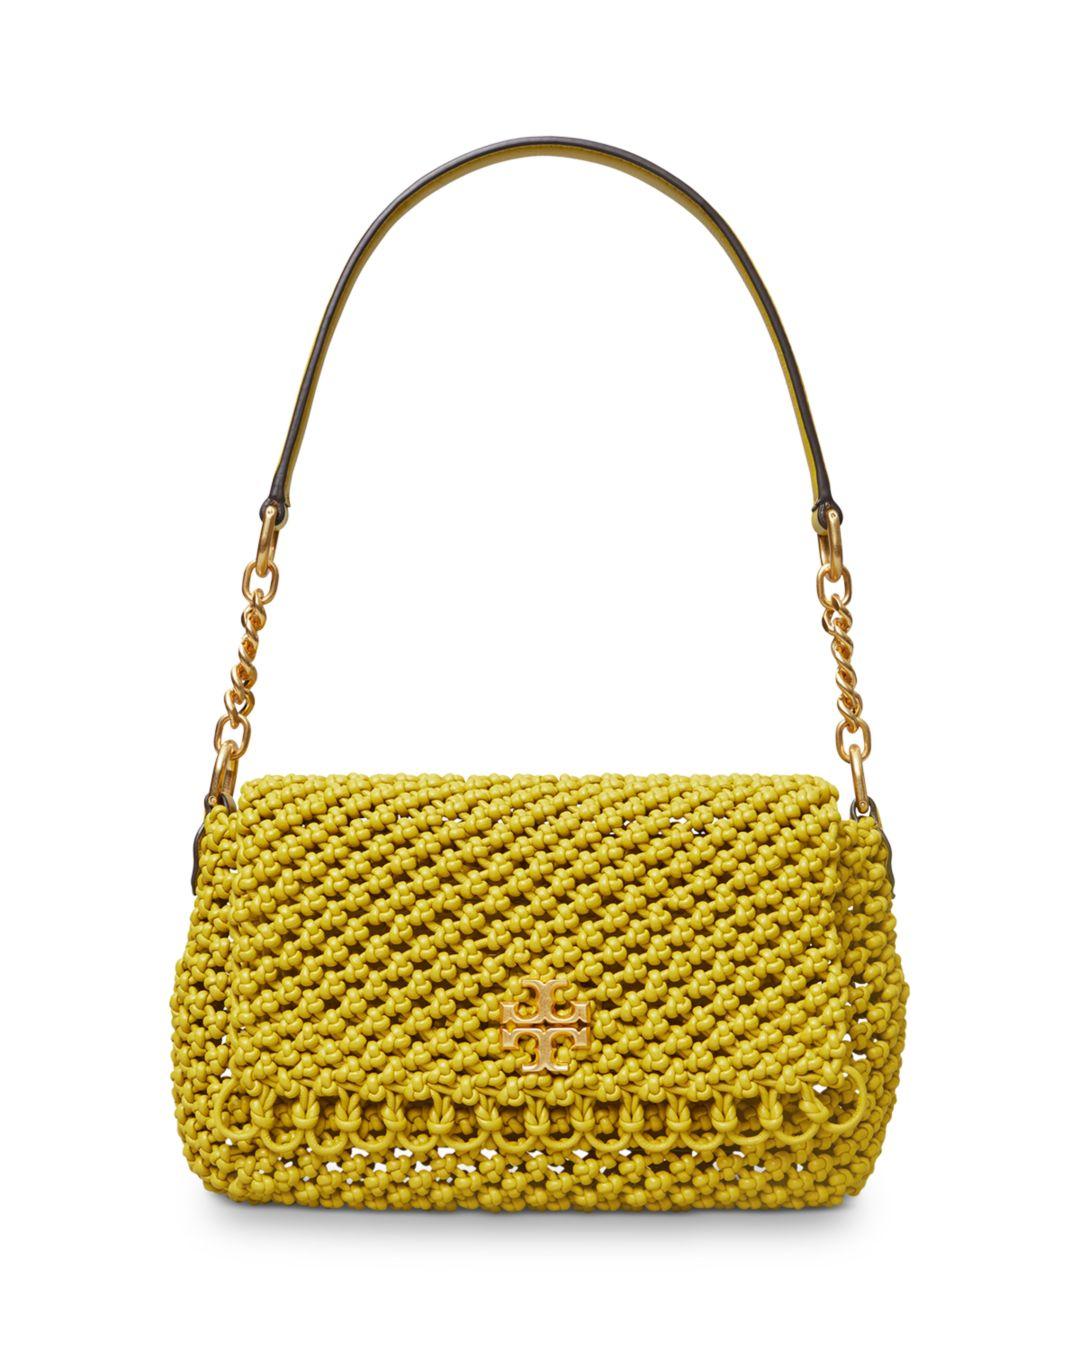 Tory Burch Kira Small Woven Leather Shoulder Bag in Metallic | Lyst